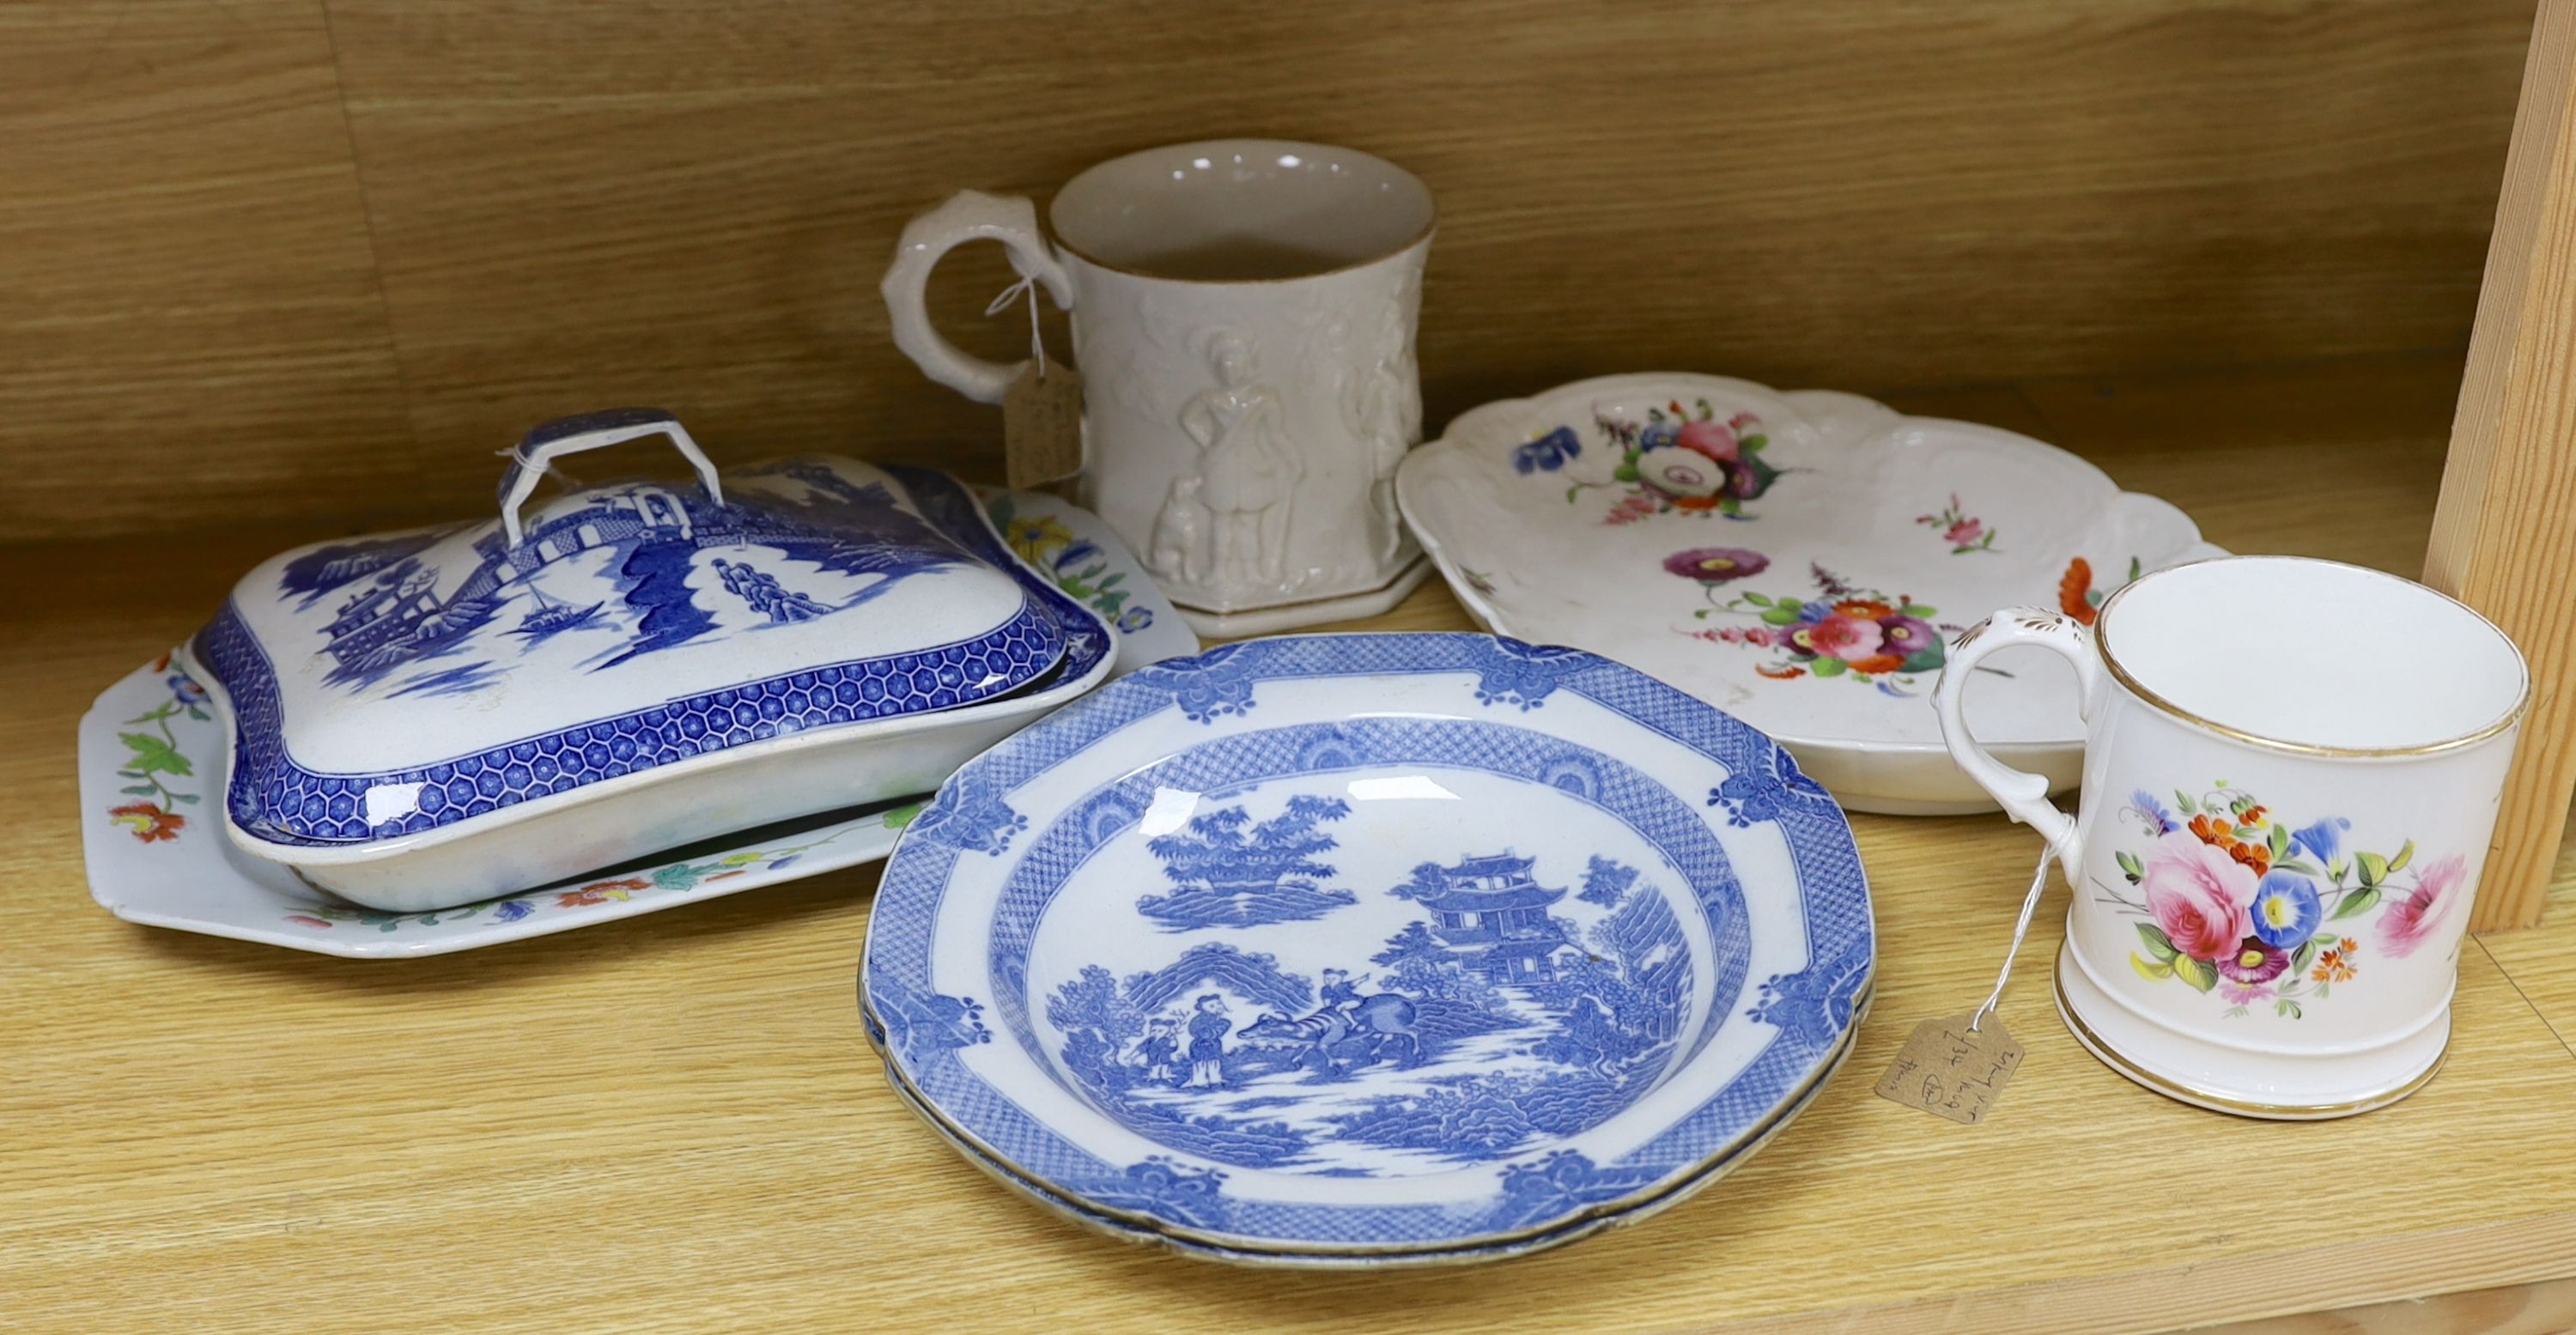 A pair of early 19th century pearlware plates, Leeds pottery tureen and cover, Coalport dessert dish. Spode serving plate and two mugs